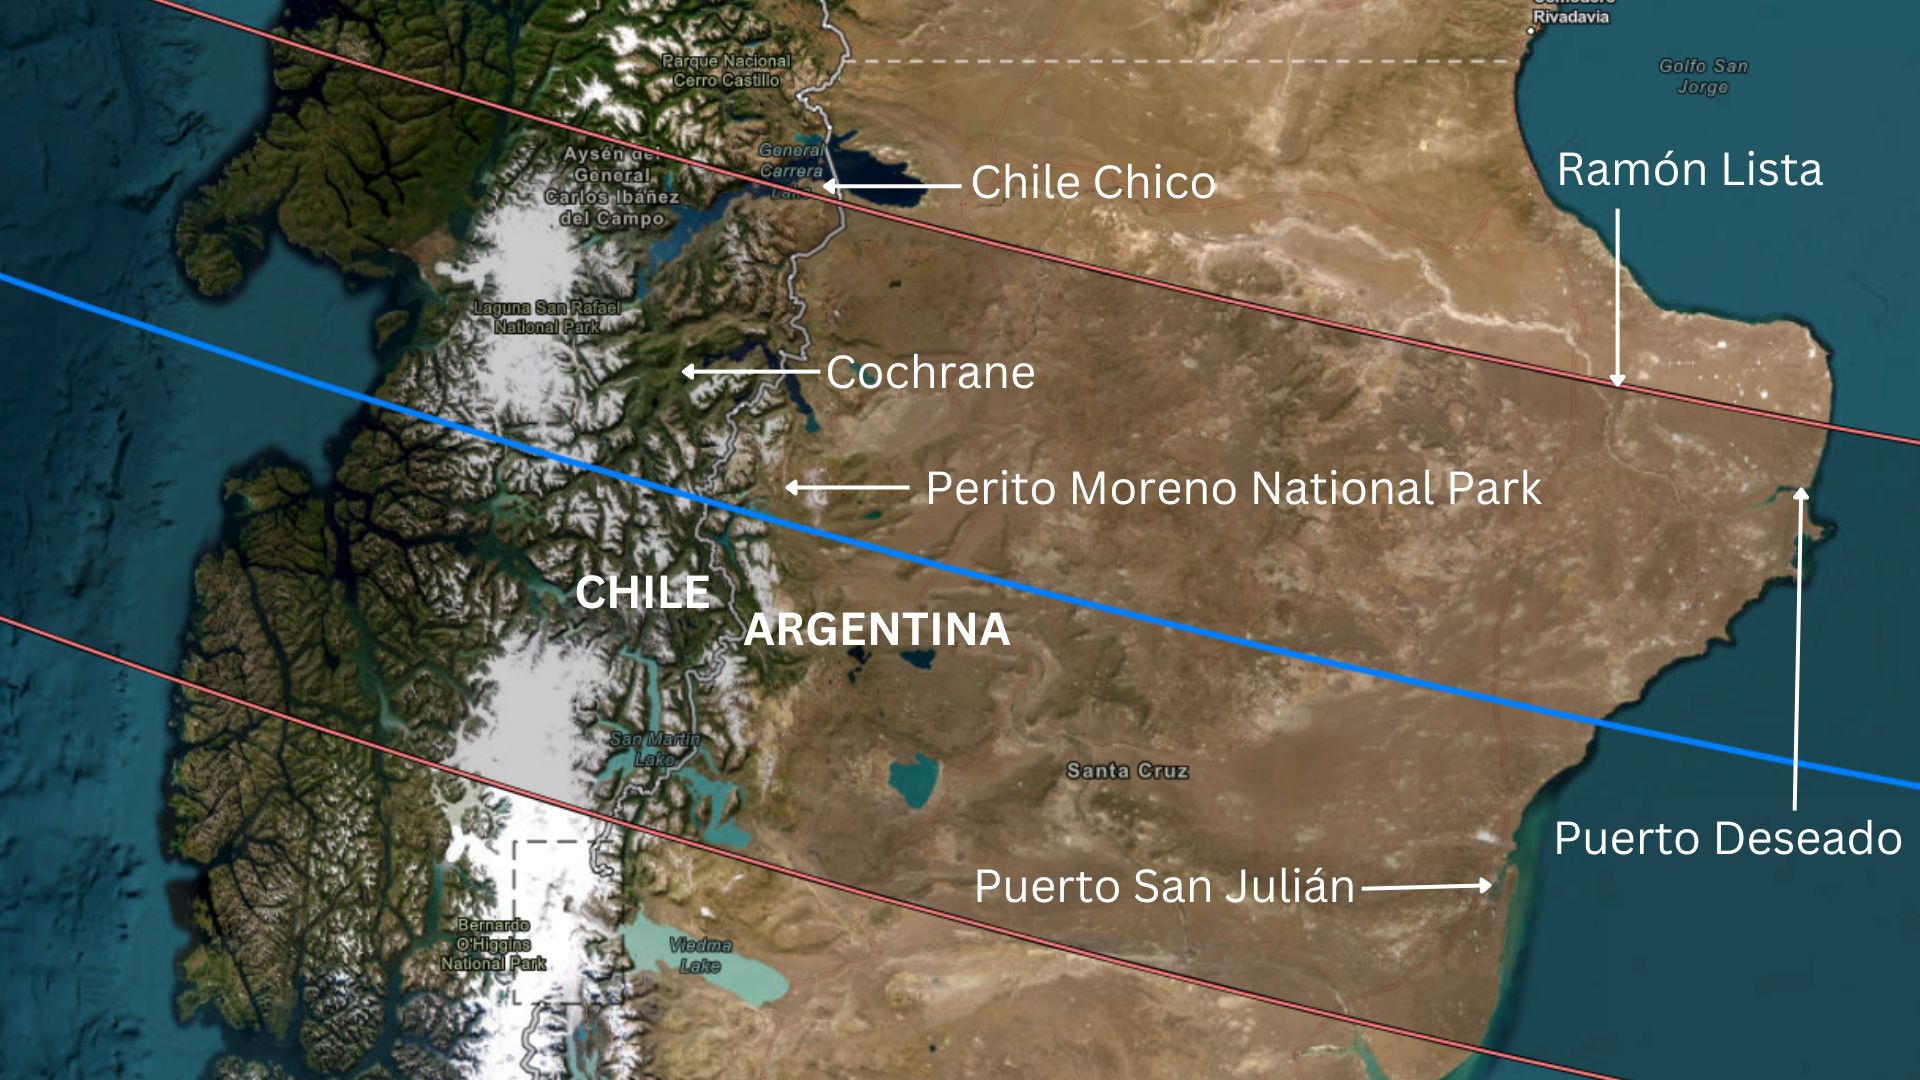 a map of south america, showing the path of annularity passing through parts of chile and argentina.